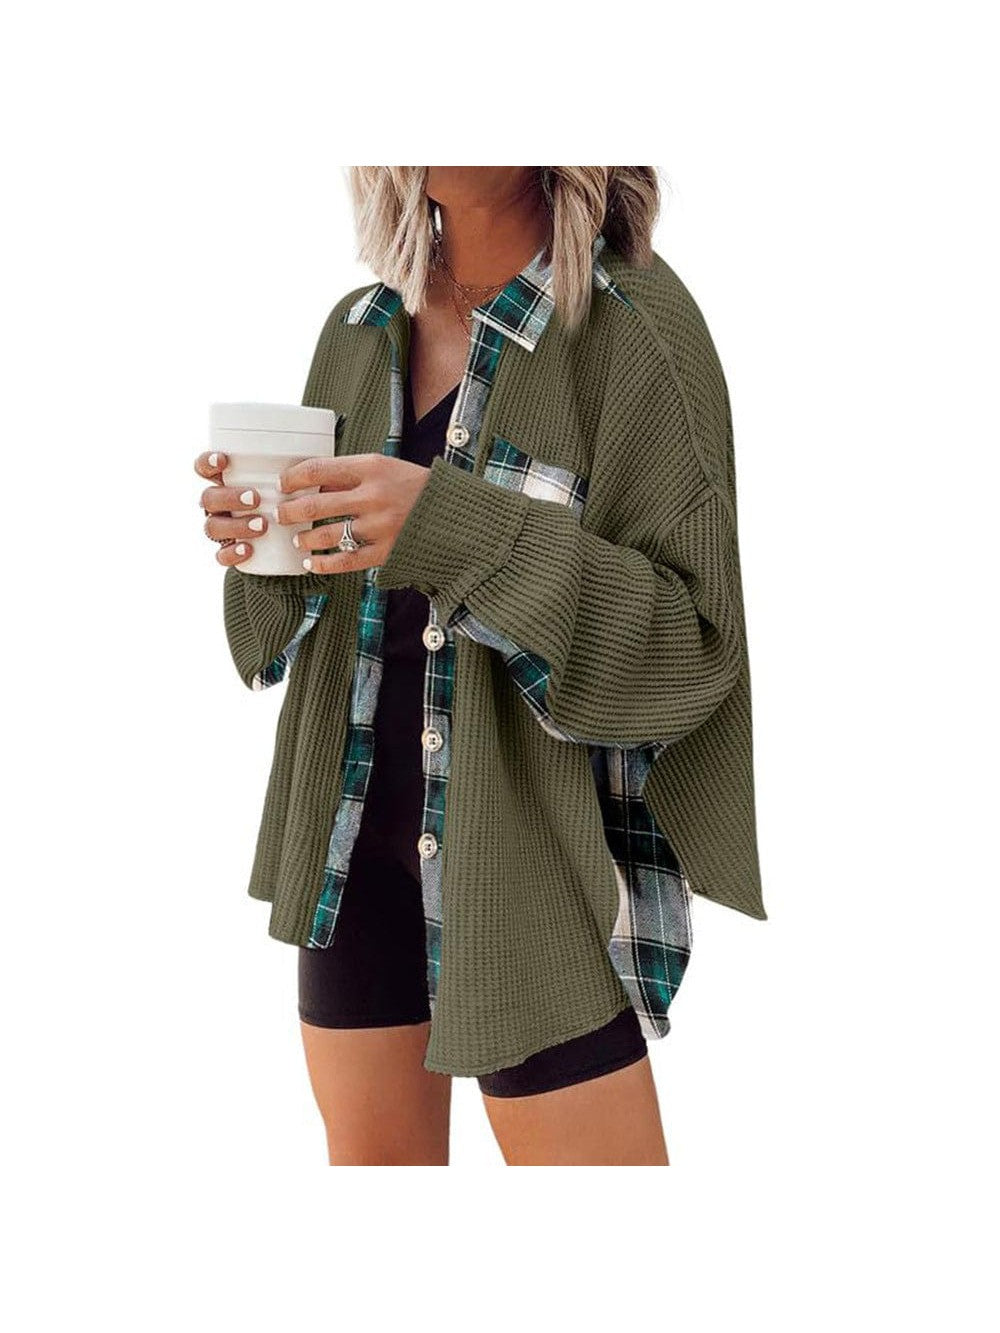 Casual women's checked boyfriend shirt with loose casual waffle knit jacket